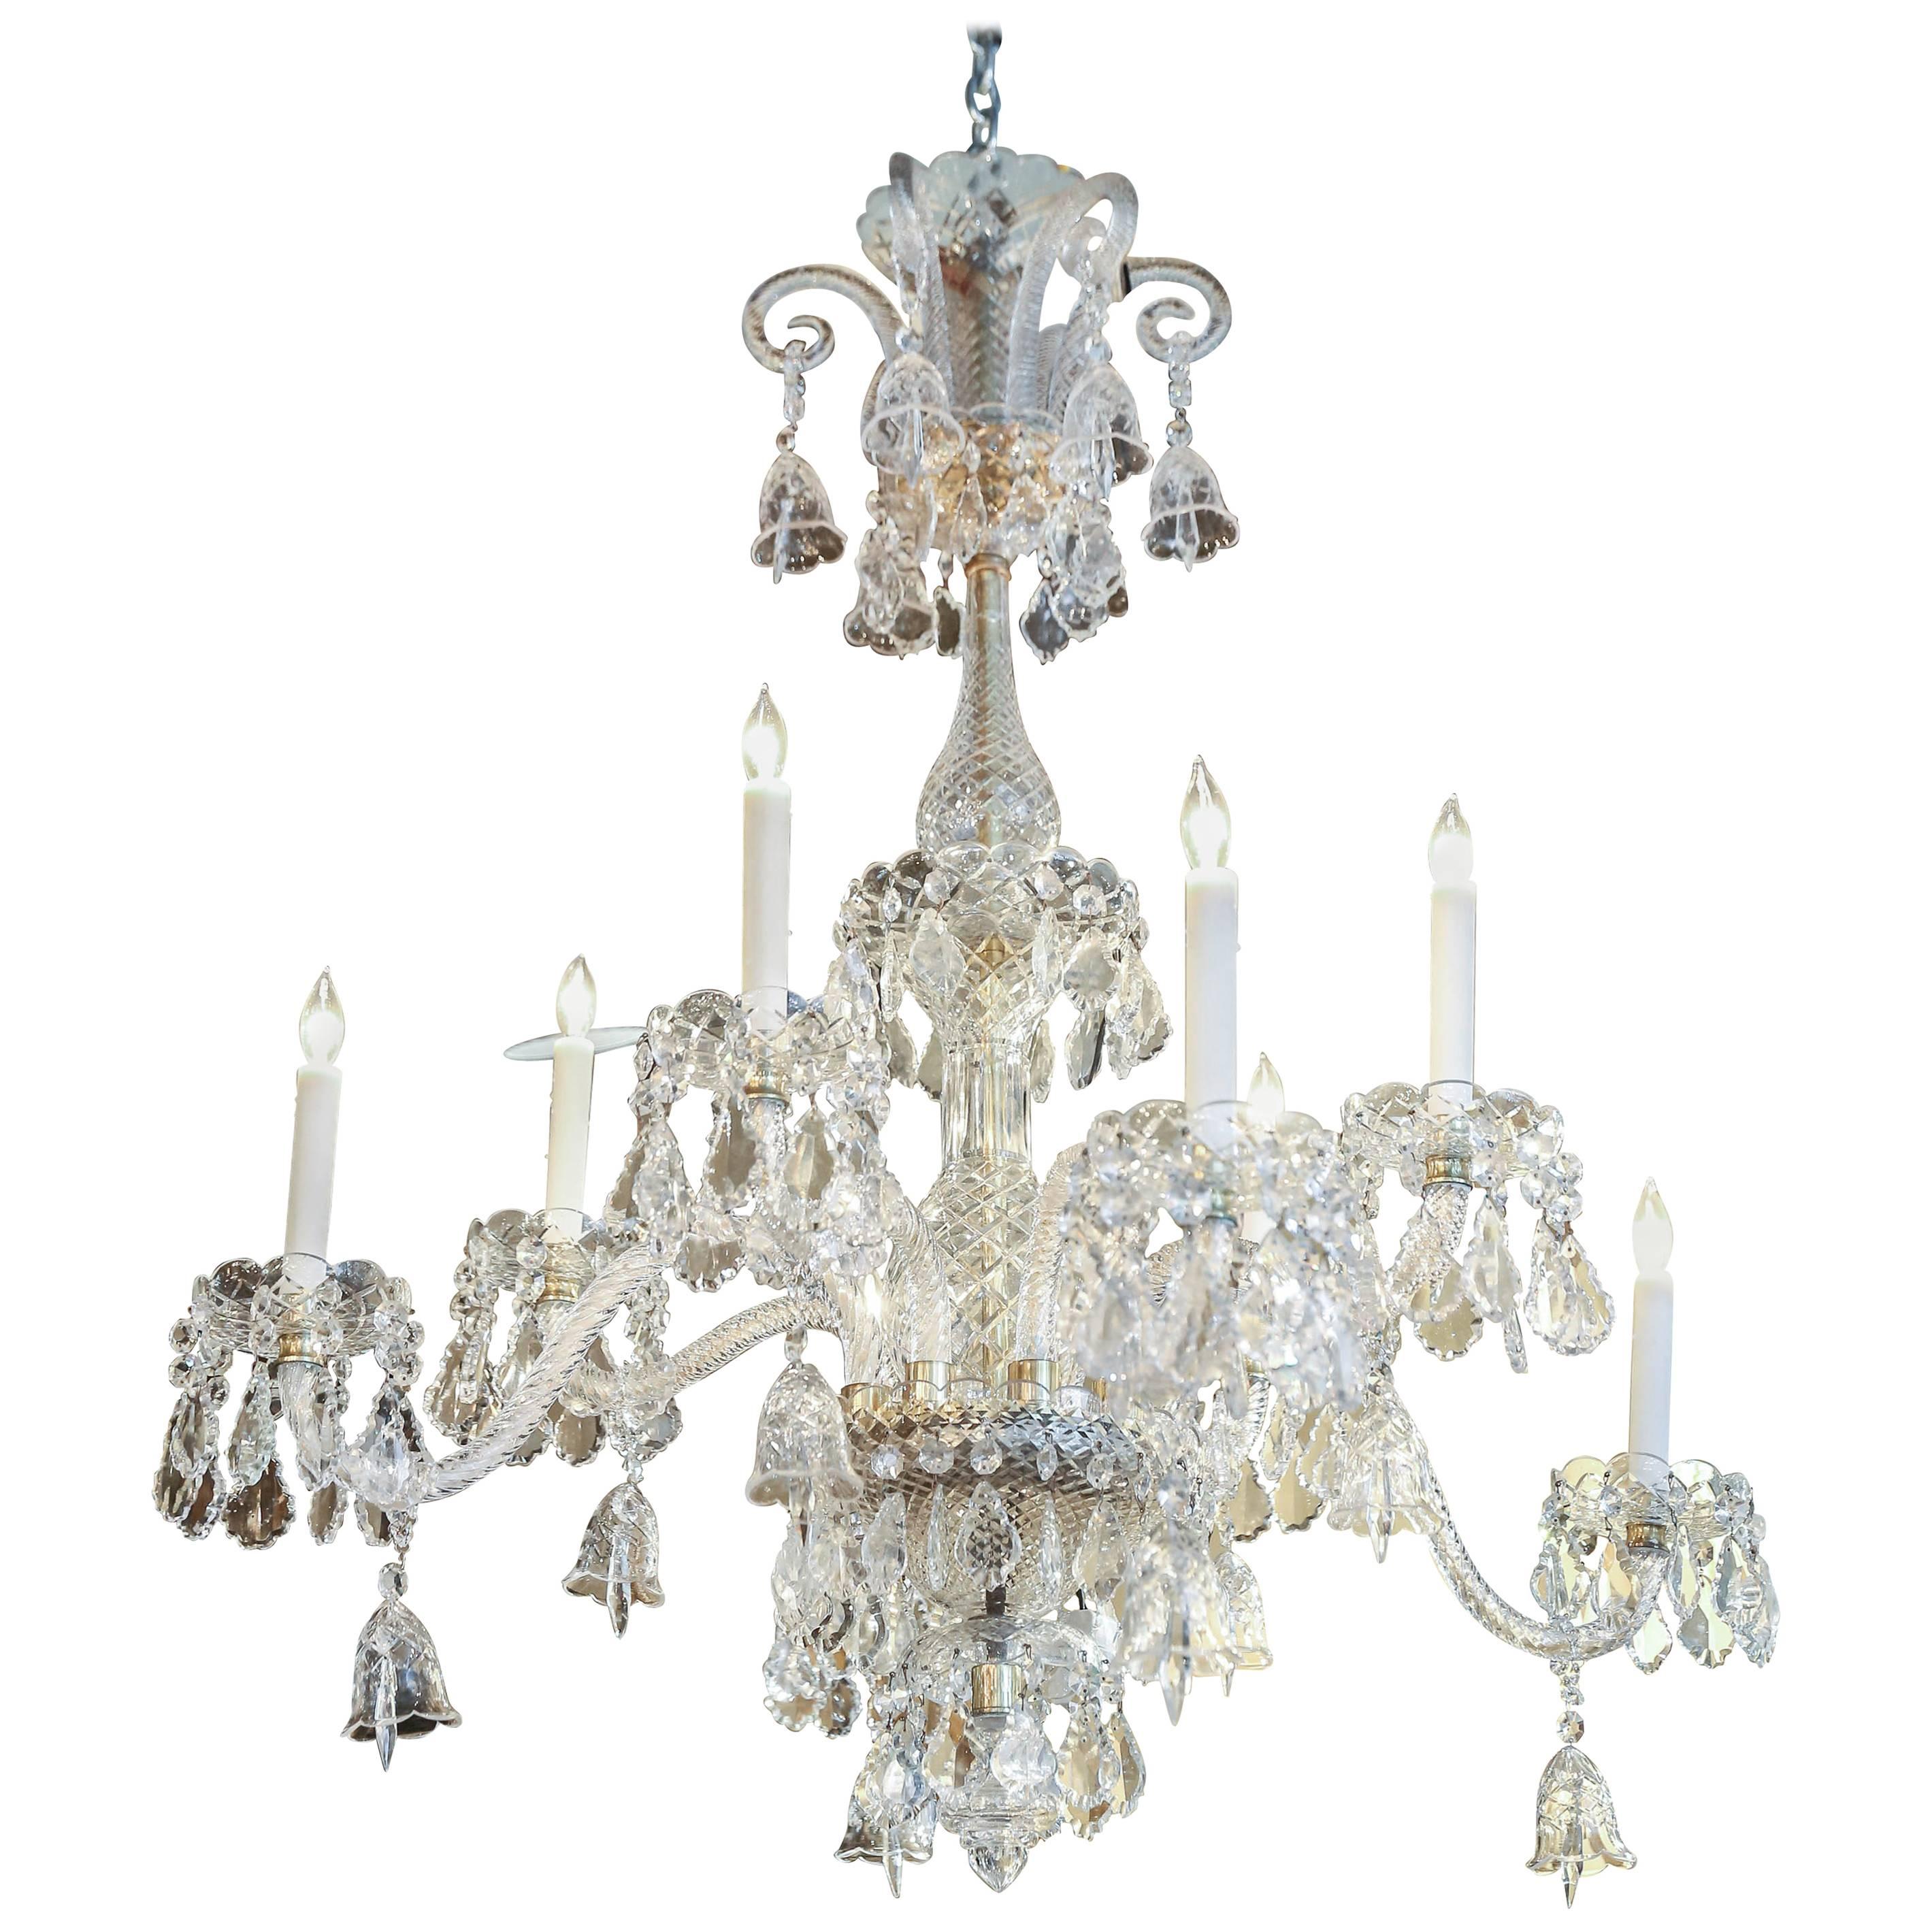 Monumental Italian Clear Crystal Eight-Light Chandelier with Drop Prism Accents